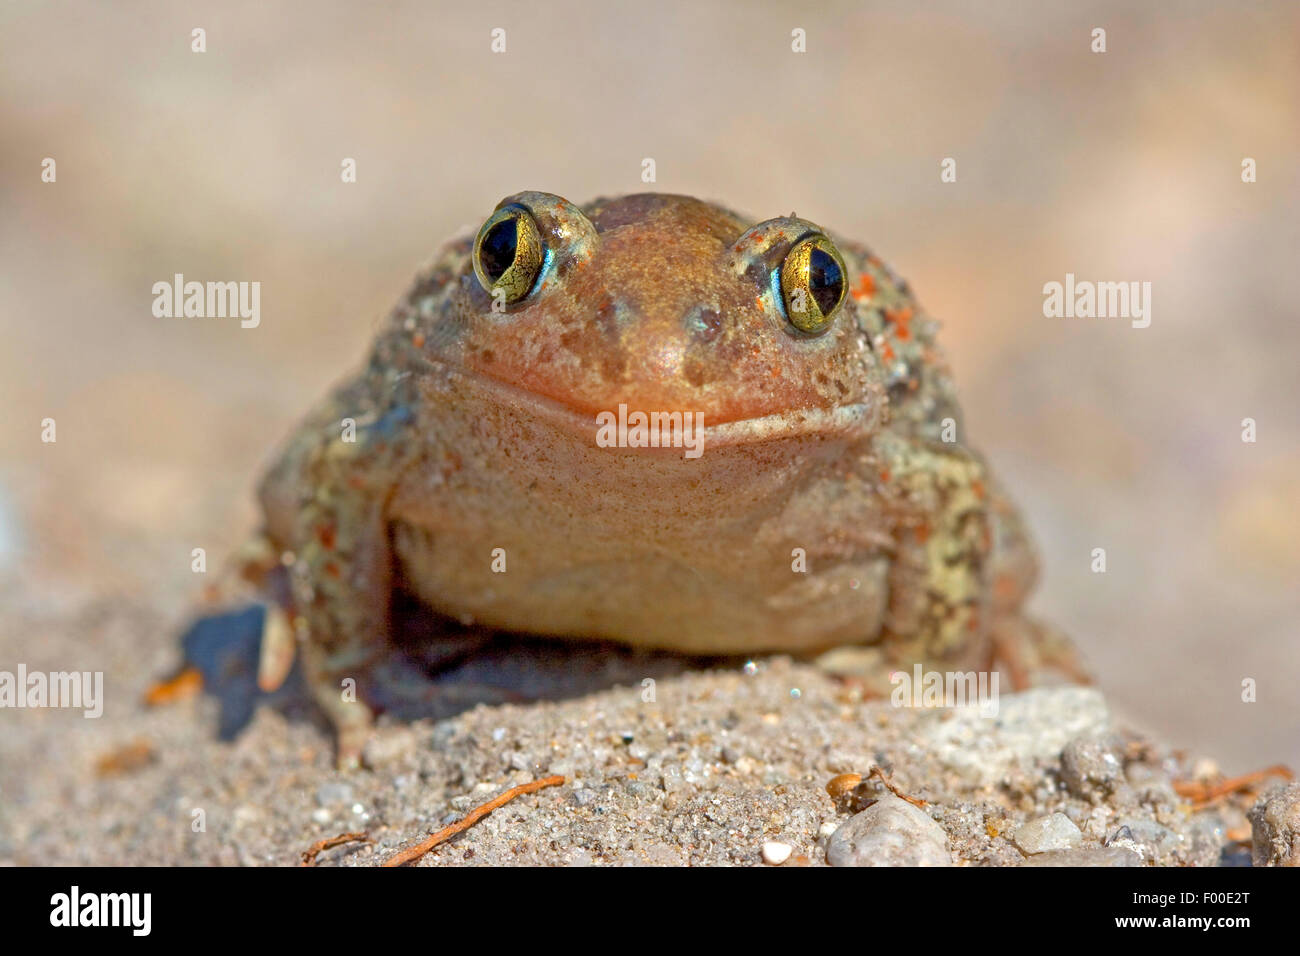 common spadefoot, garlic toad (Pelobates fuscus), sitting on the ground, front view, Germany Stock Photo